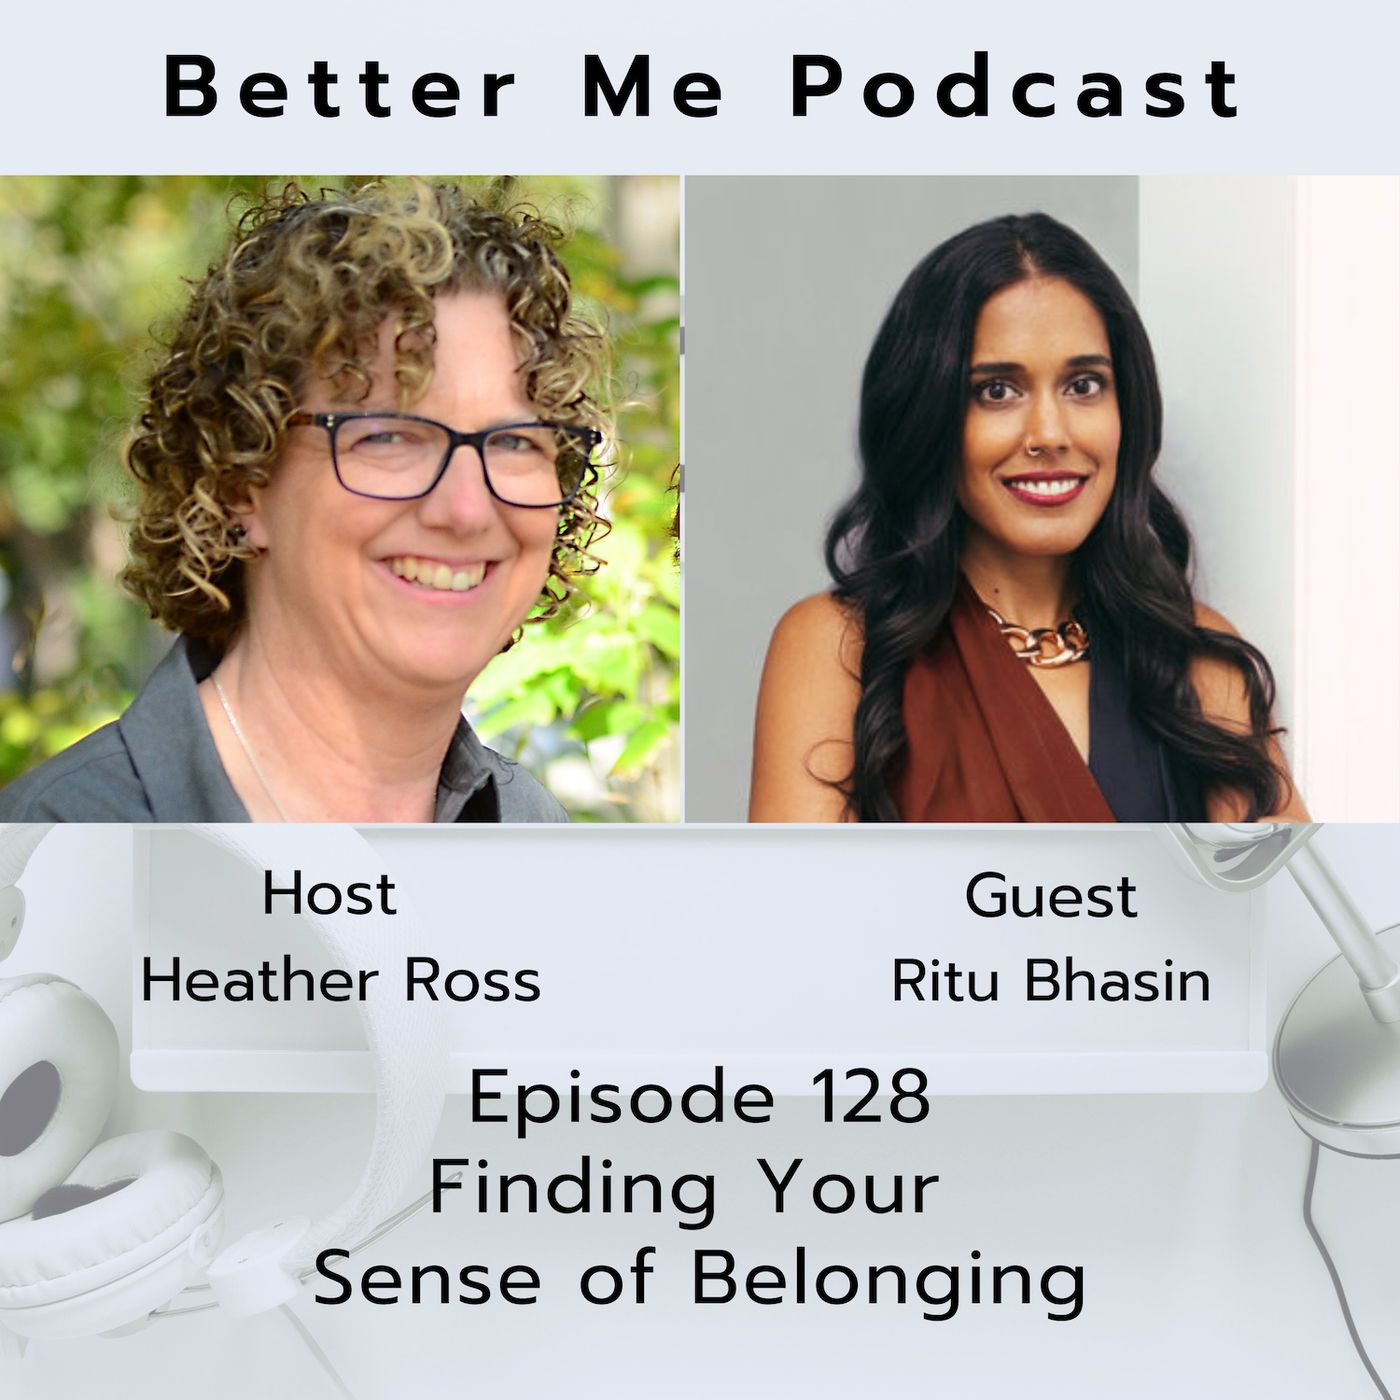 EP 128 Finding Your Sense of Belonging (with guest Ritu Bhasin)